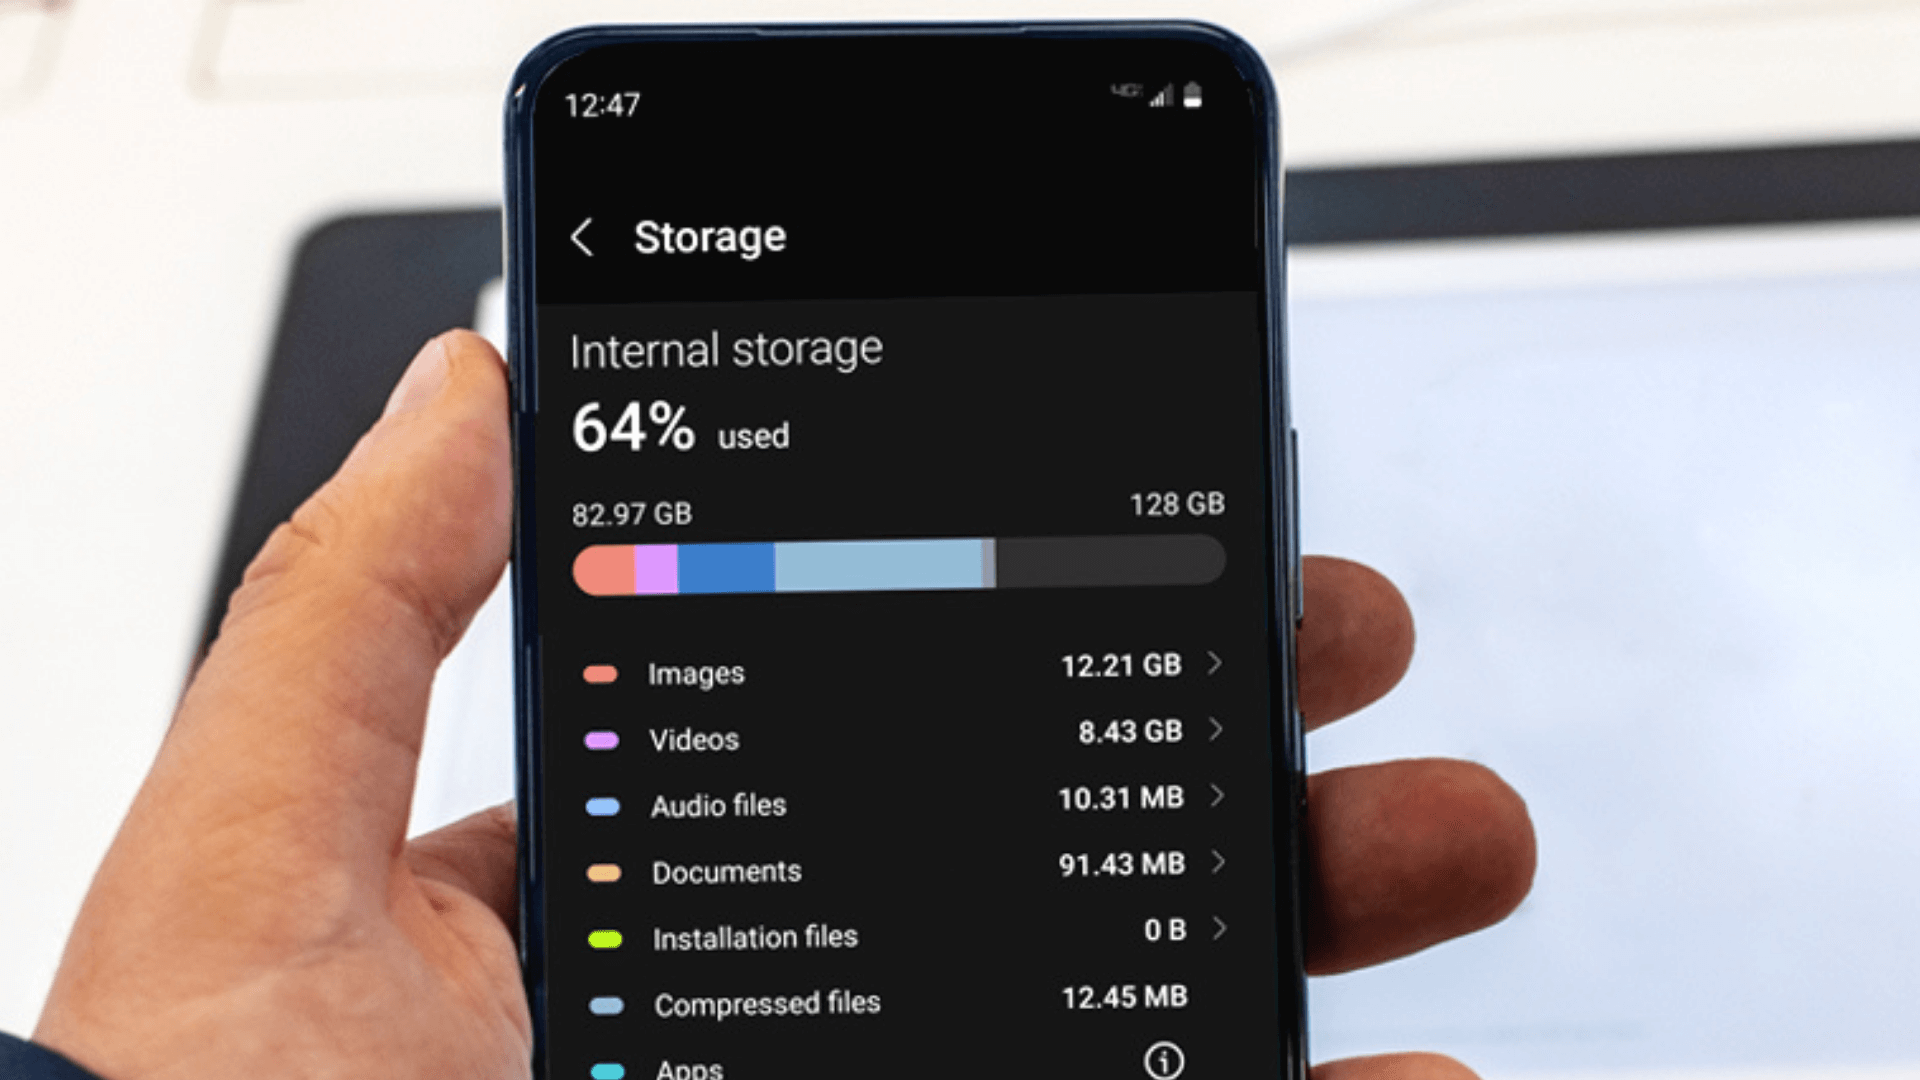 Deep cleaning to optimise phone storage